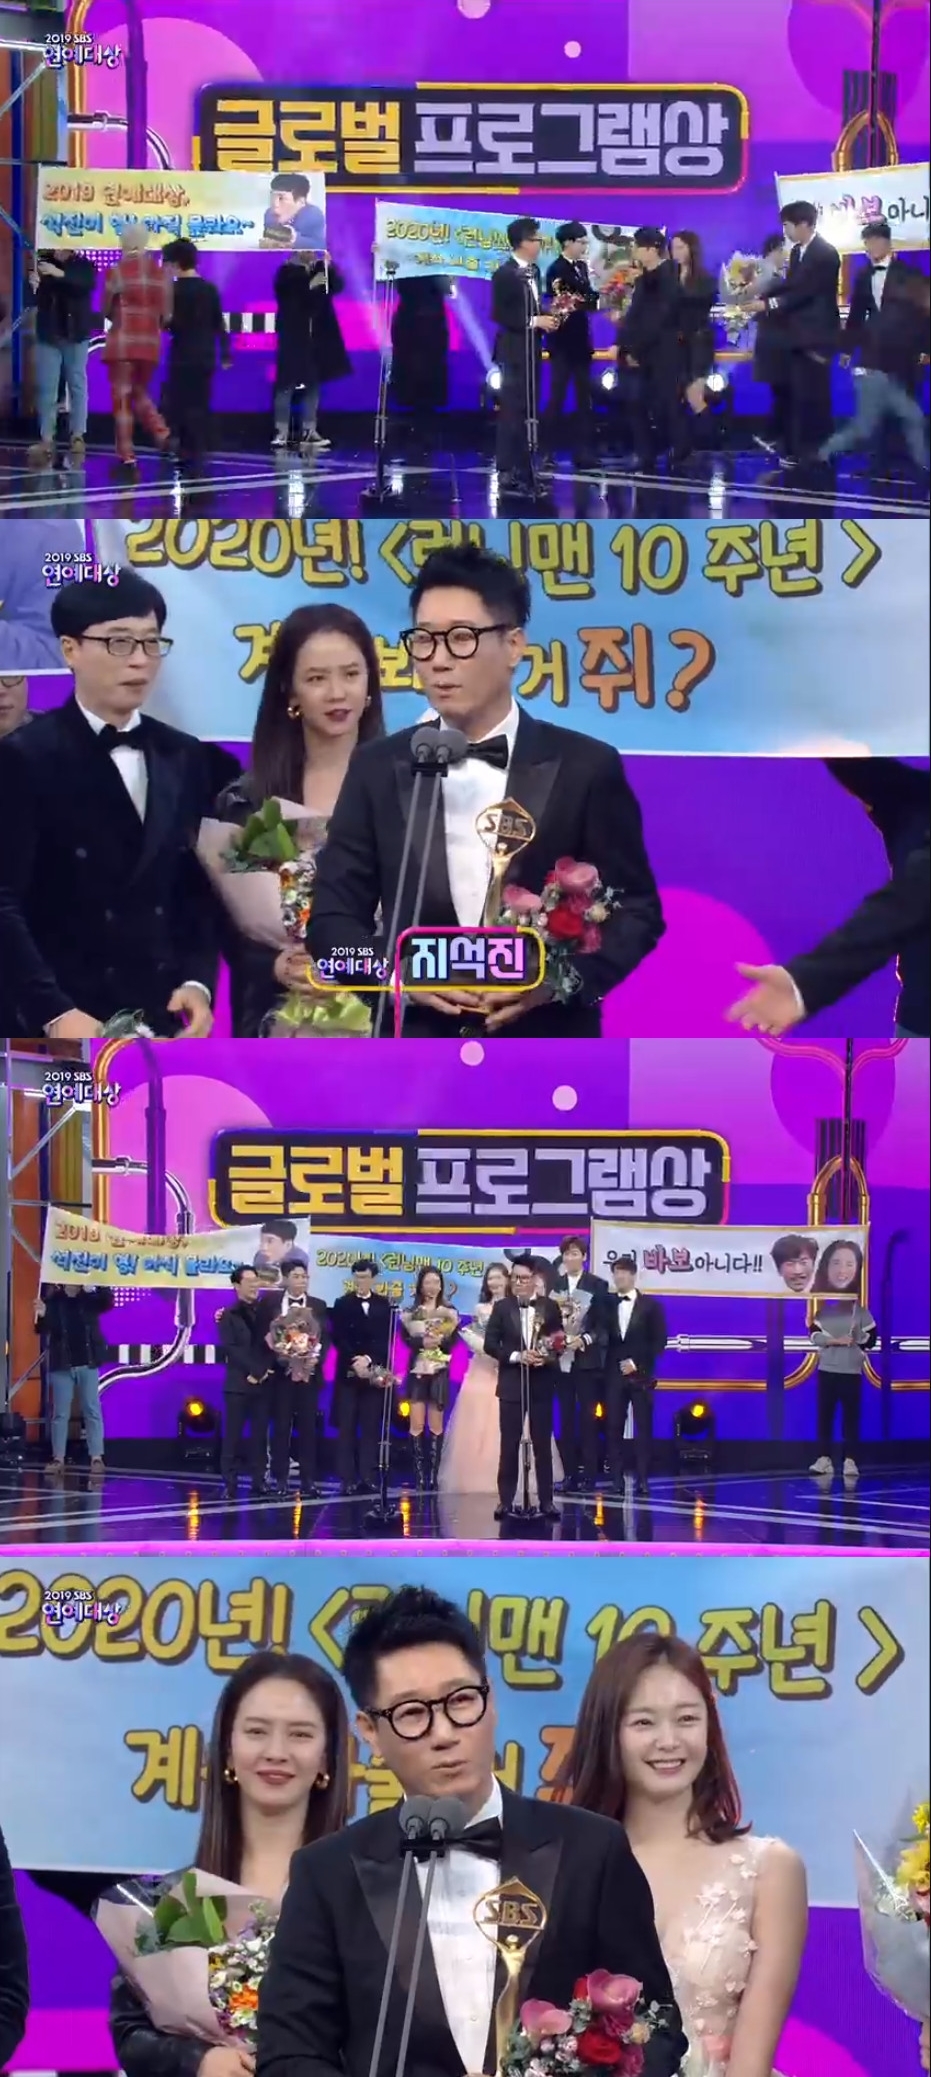 Seoul=) = SBS Running Man won the 2019 SBS Entertainment Grand Prize Global Program Award.The Running Man team won the prize at the 2019 SBS Entertainment Grand Prize, which was broadcast live from 9 pm on the 28th.Ji Suk-jin said, Thank you so much. I thought that from one day, the whole members could get a Grand Prize, but today I do not think so.I think a nice person will take a Grand prize. Ji Suk-jin said, Thank you for supporting all the production team. It was too hard. The members are showing great sum, but I think it is the award given by viewers.I am grateful that I am receiving it because of many fans overseas. 